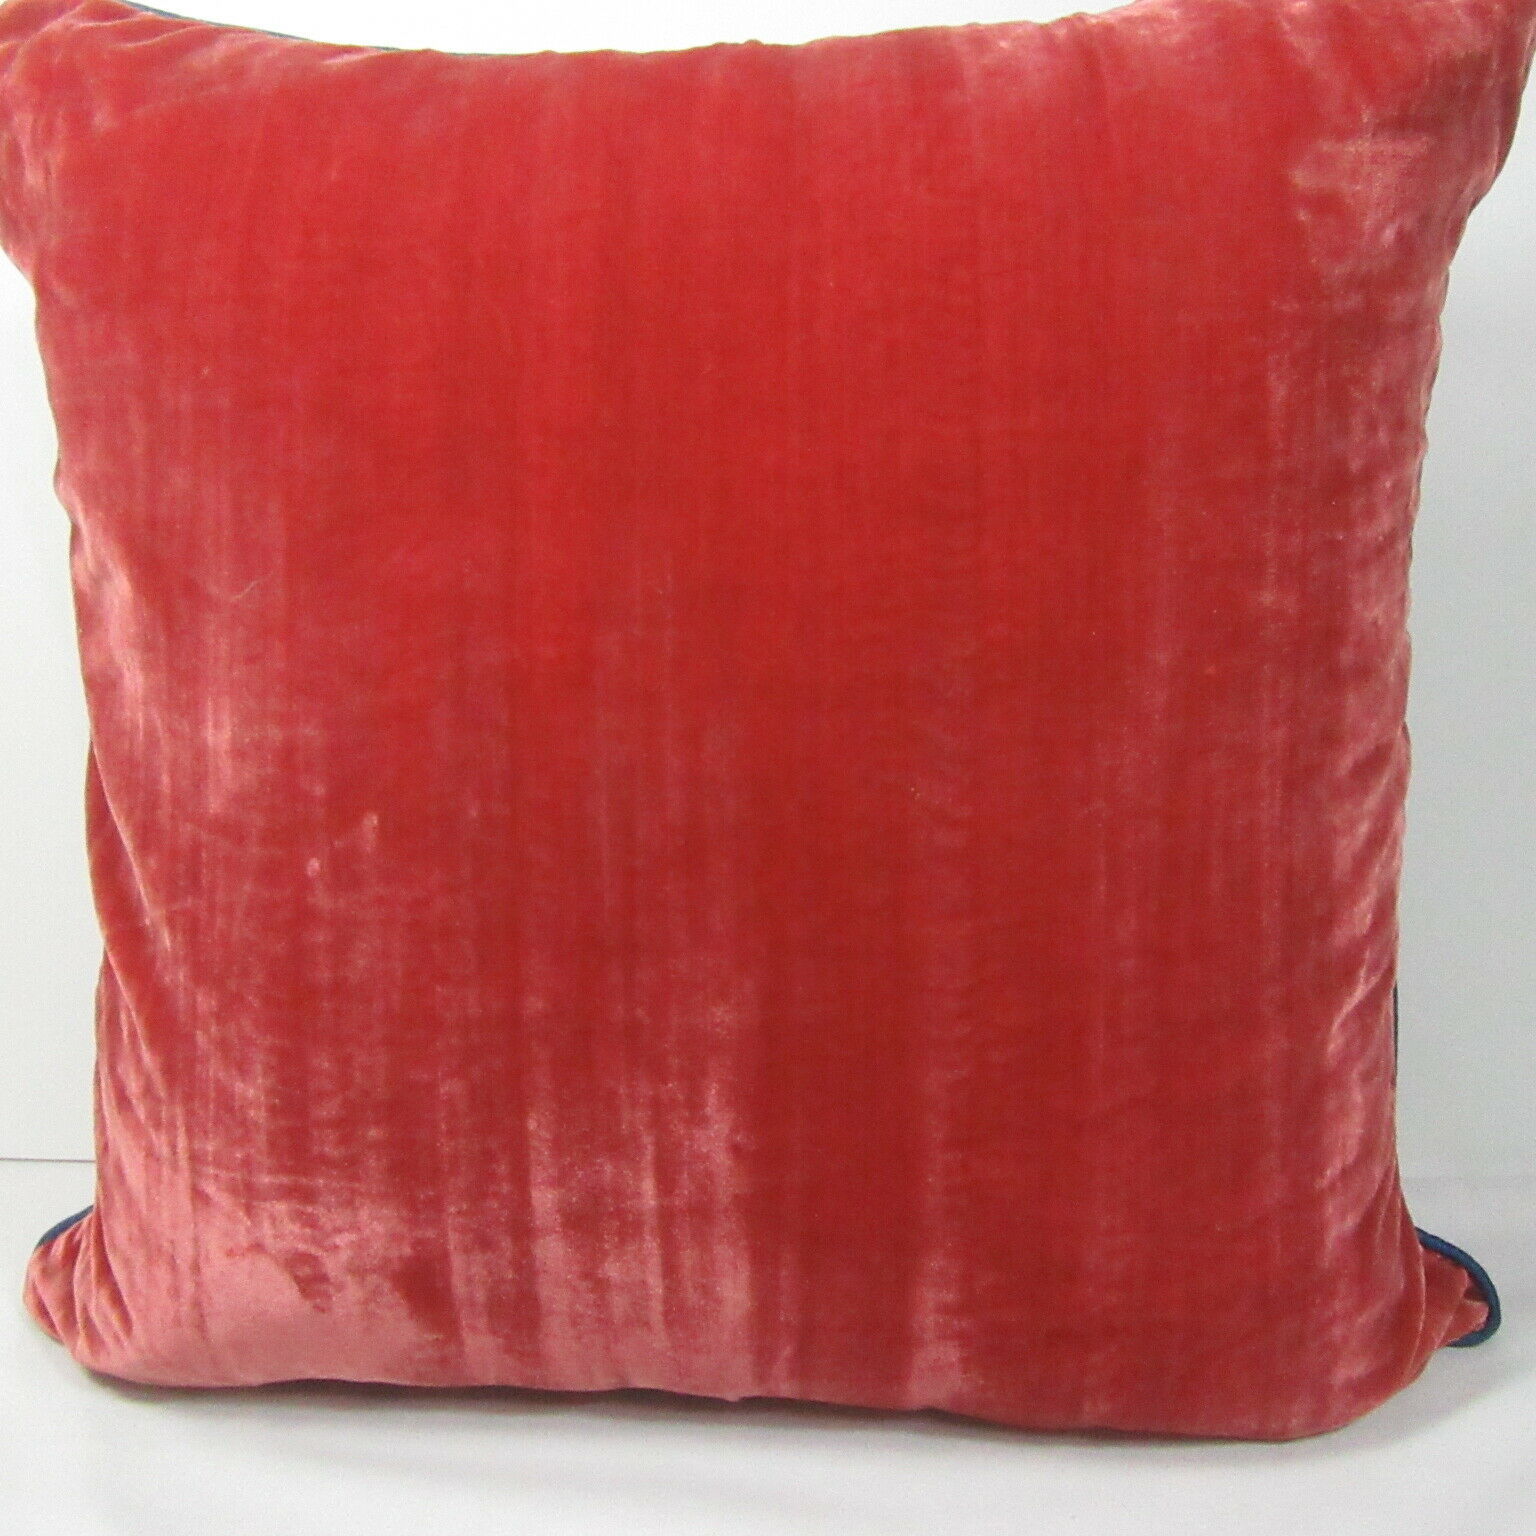 Primary image for Tracy Porter Poetic Wanderlust Red Velvet 20-inch Square Decorative Pillow